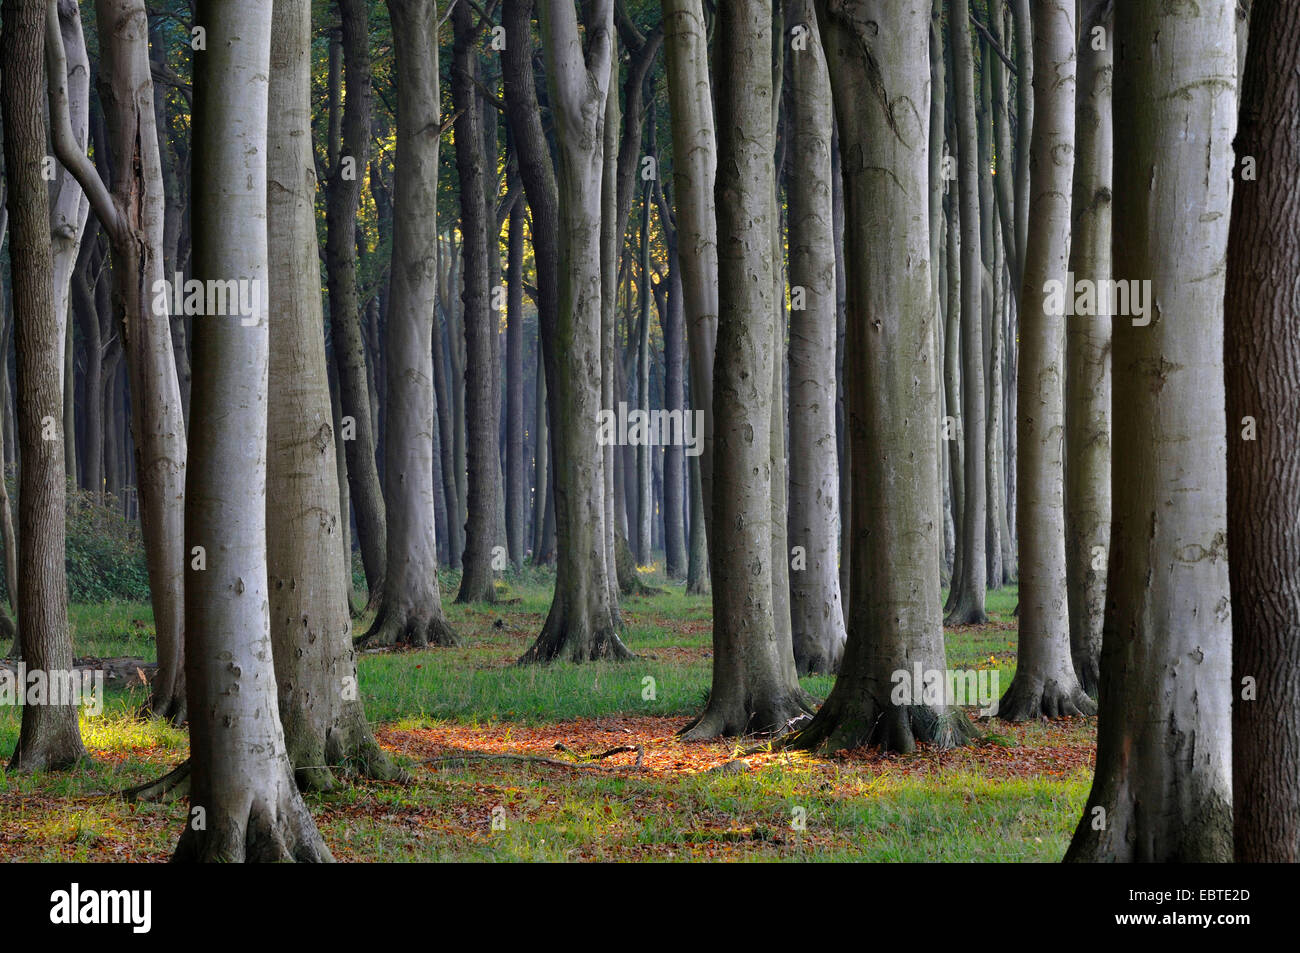 common beech (Fagus sylvatica), beech forest in autumn, Germany, Mecklenburg-Western Pomerania Stock Photo